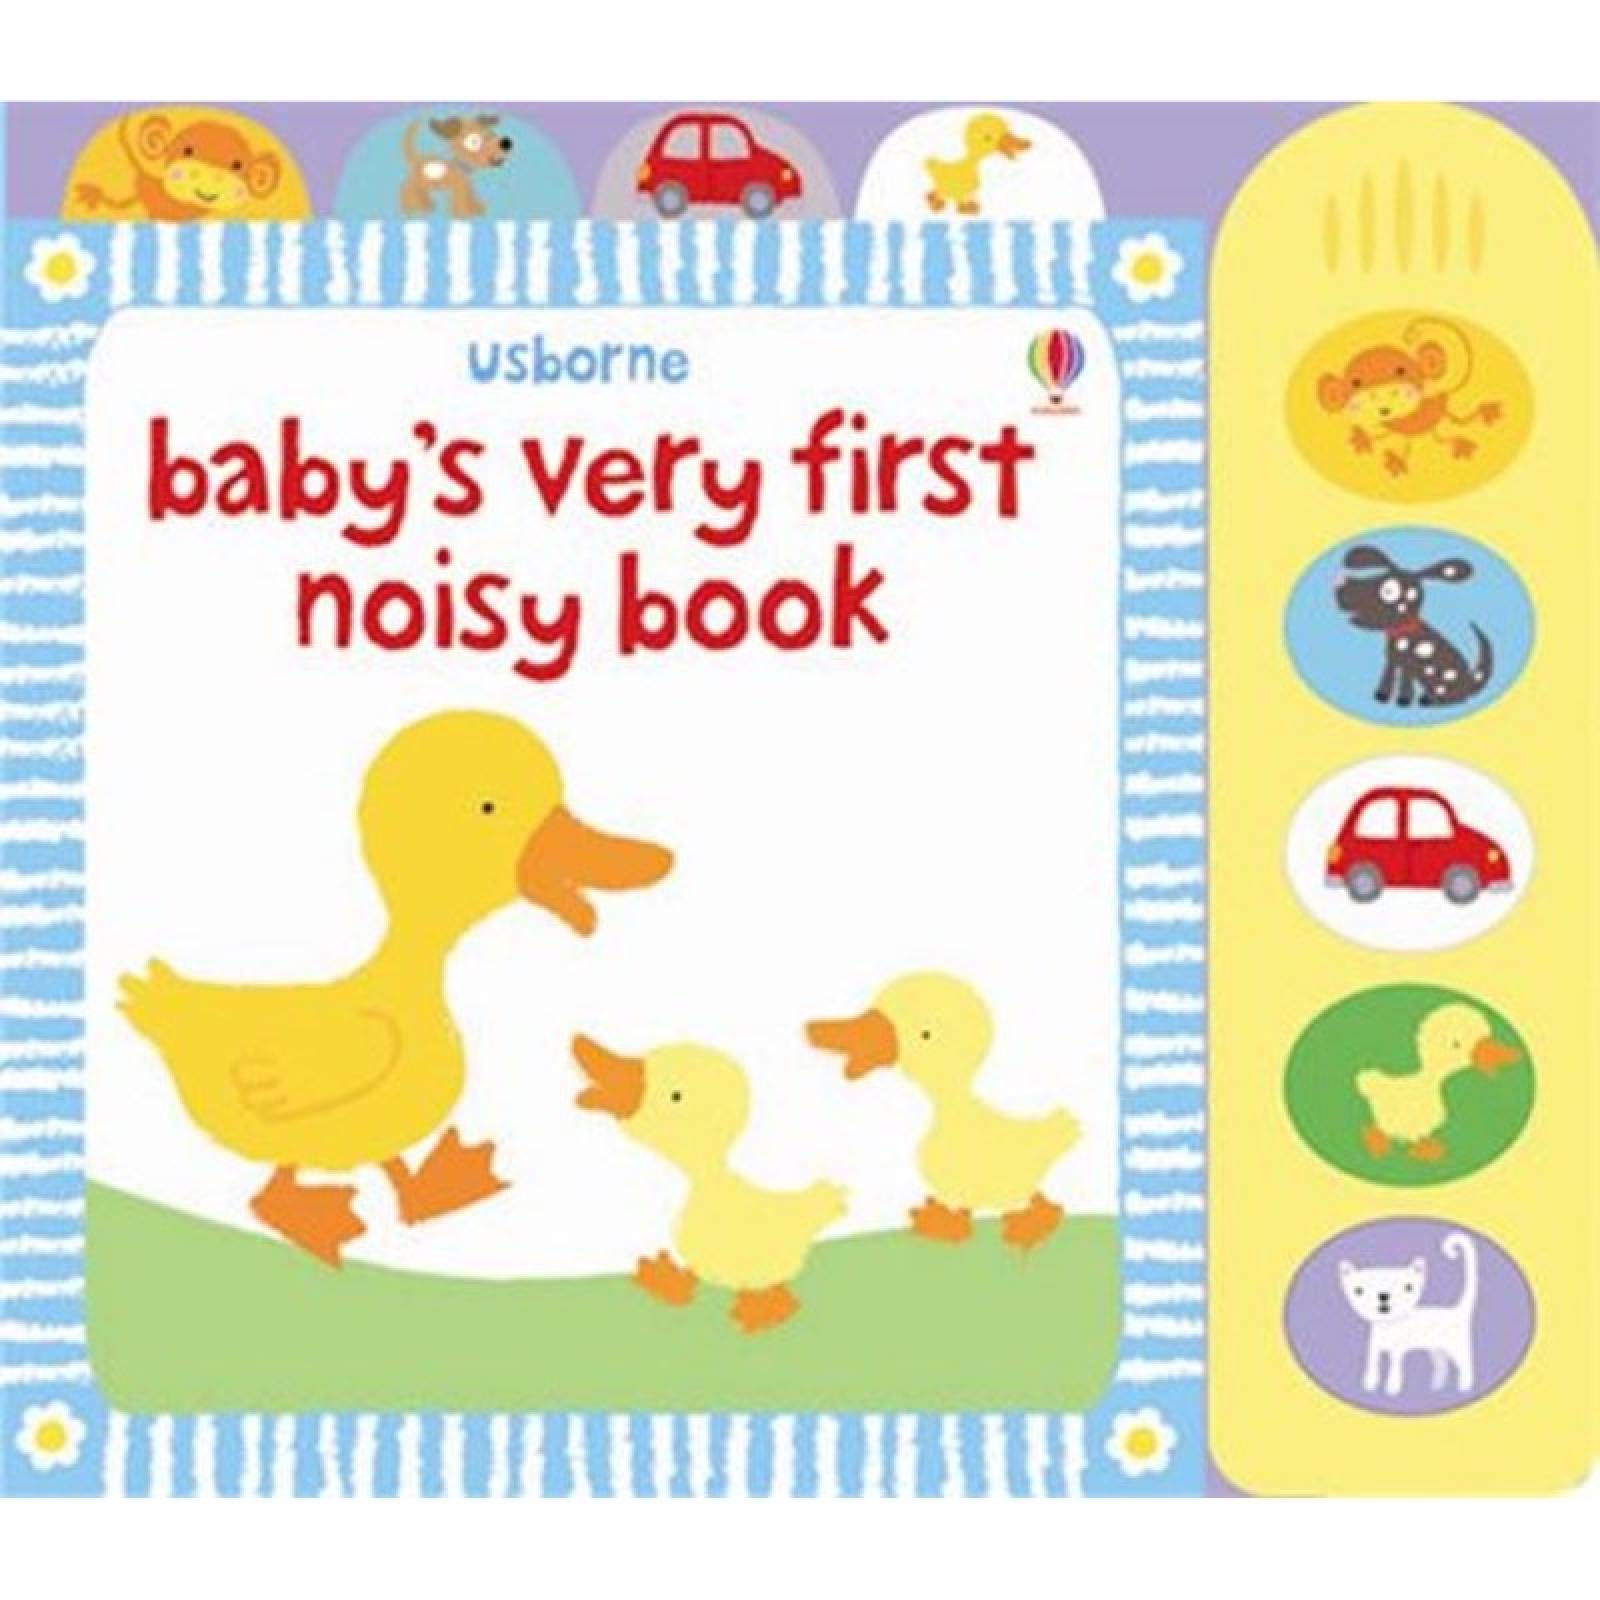 Baby's Very First Noisy Book - Sound Book